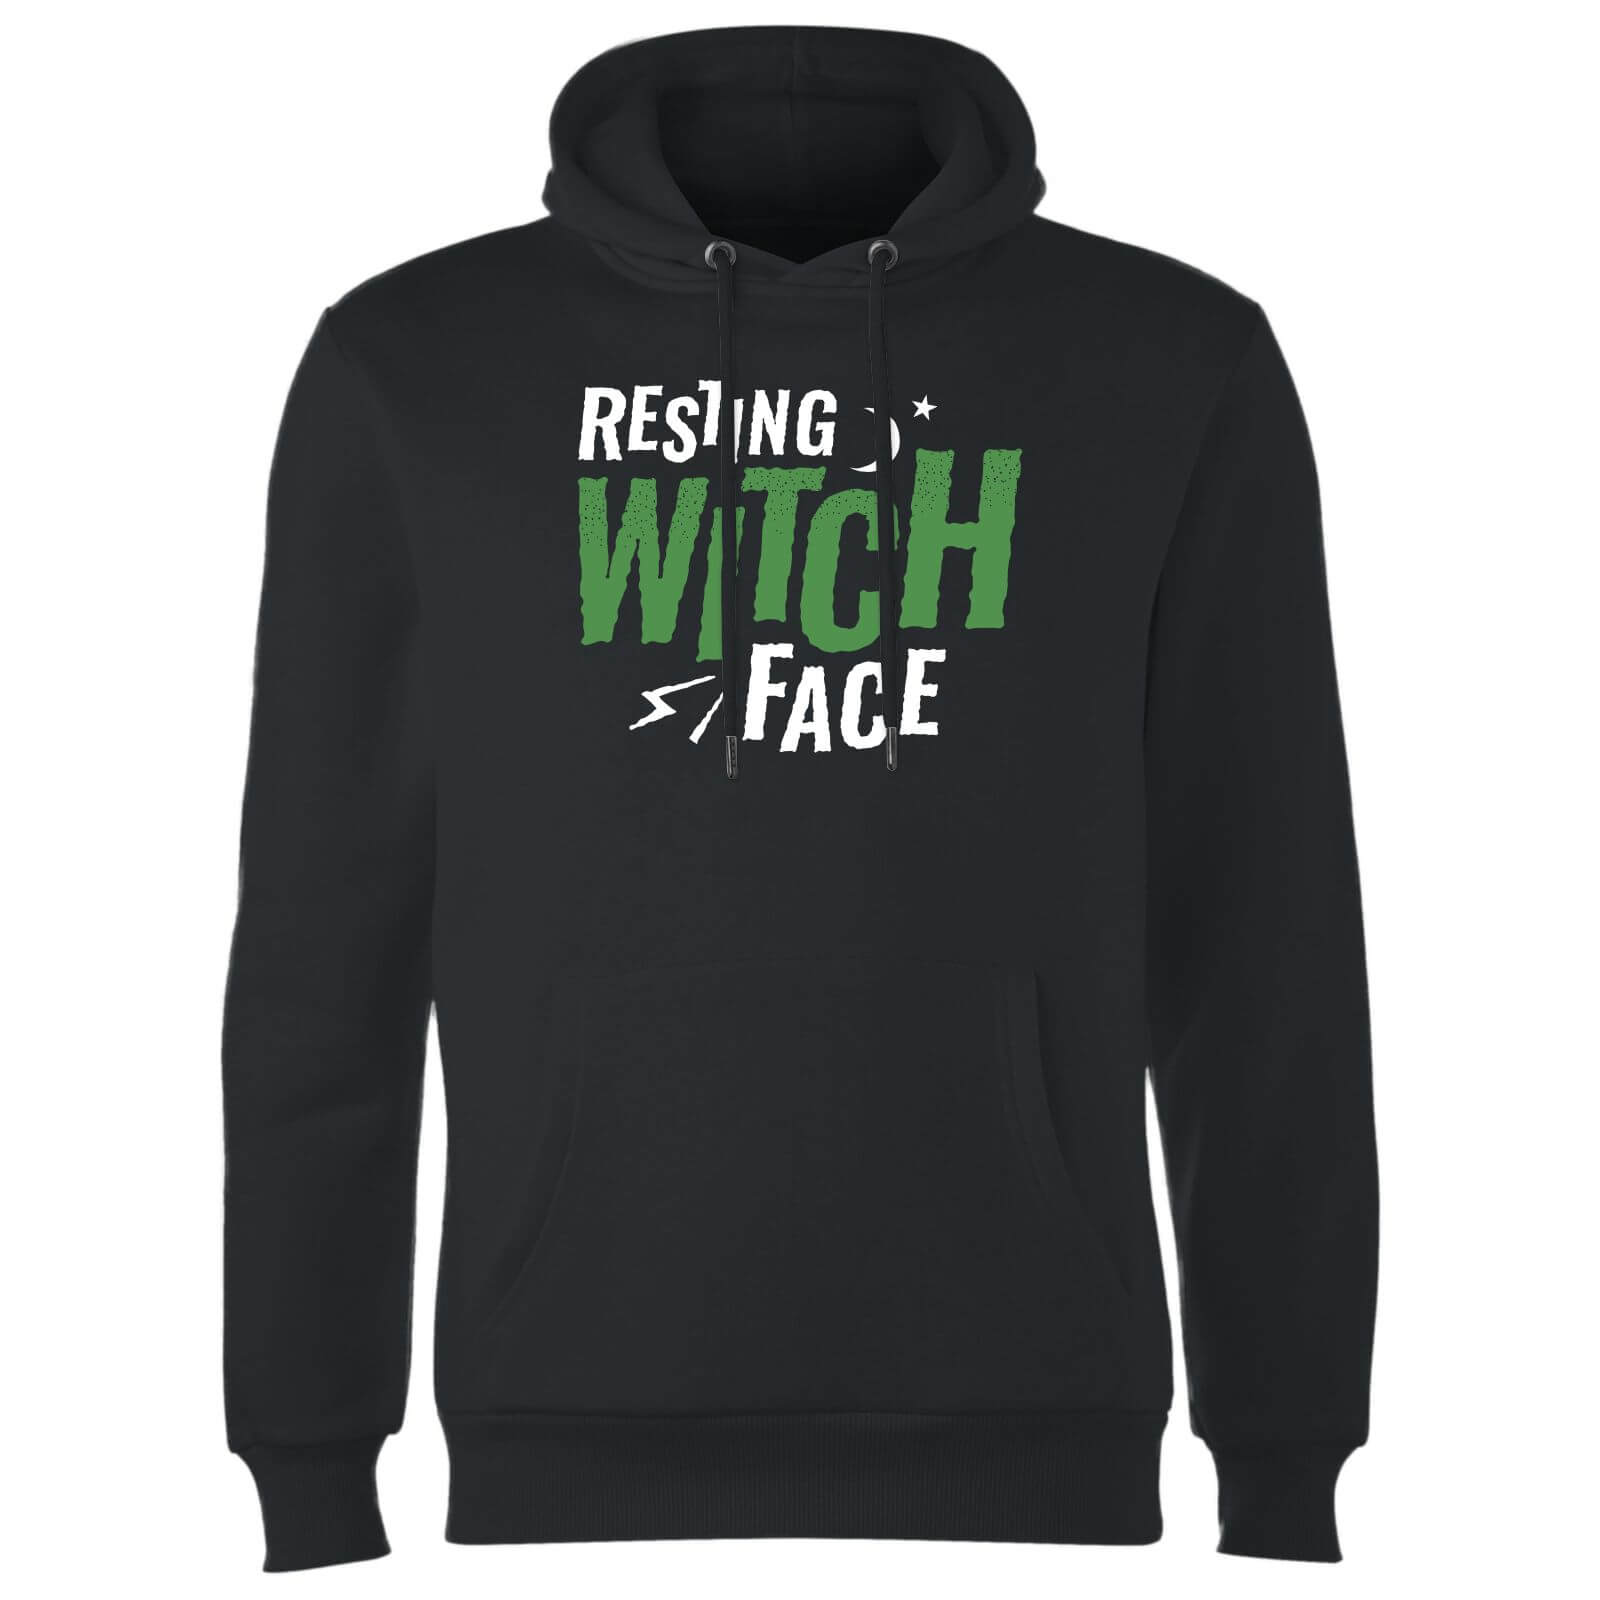 Resting Witch Face Hoodie - Black - L